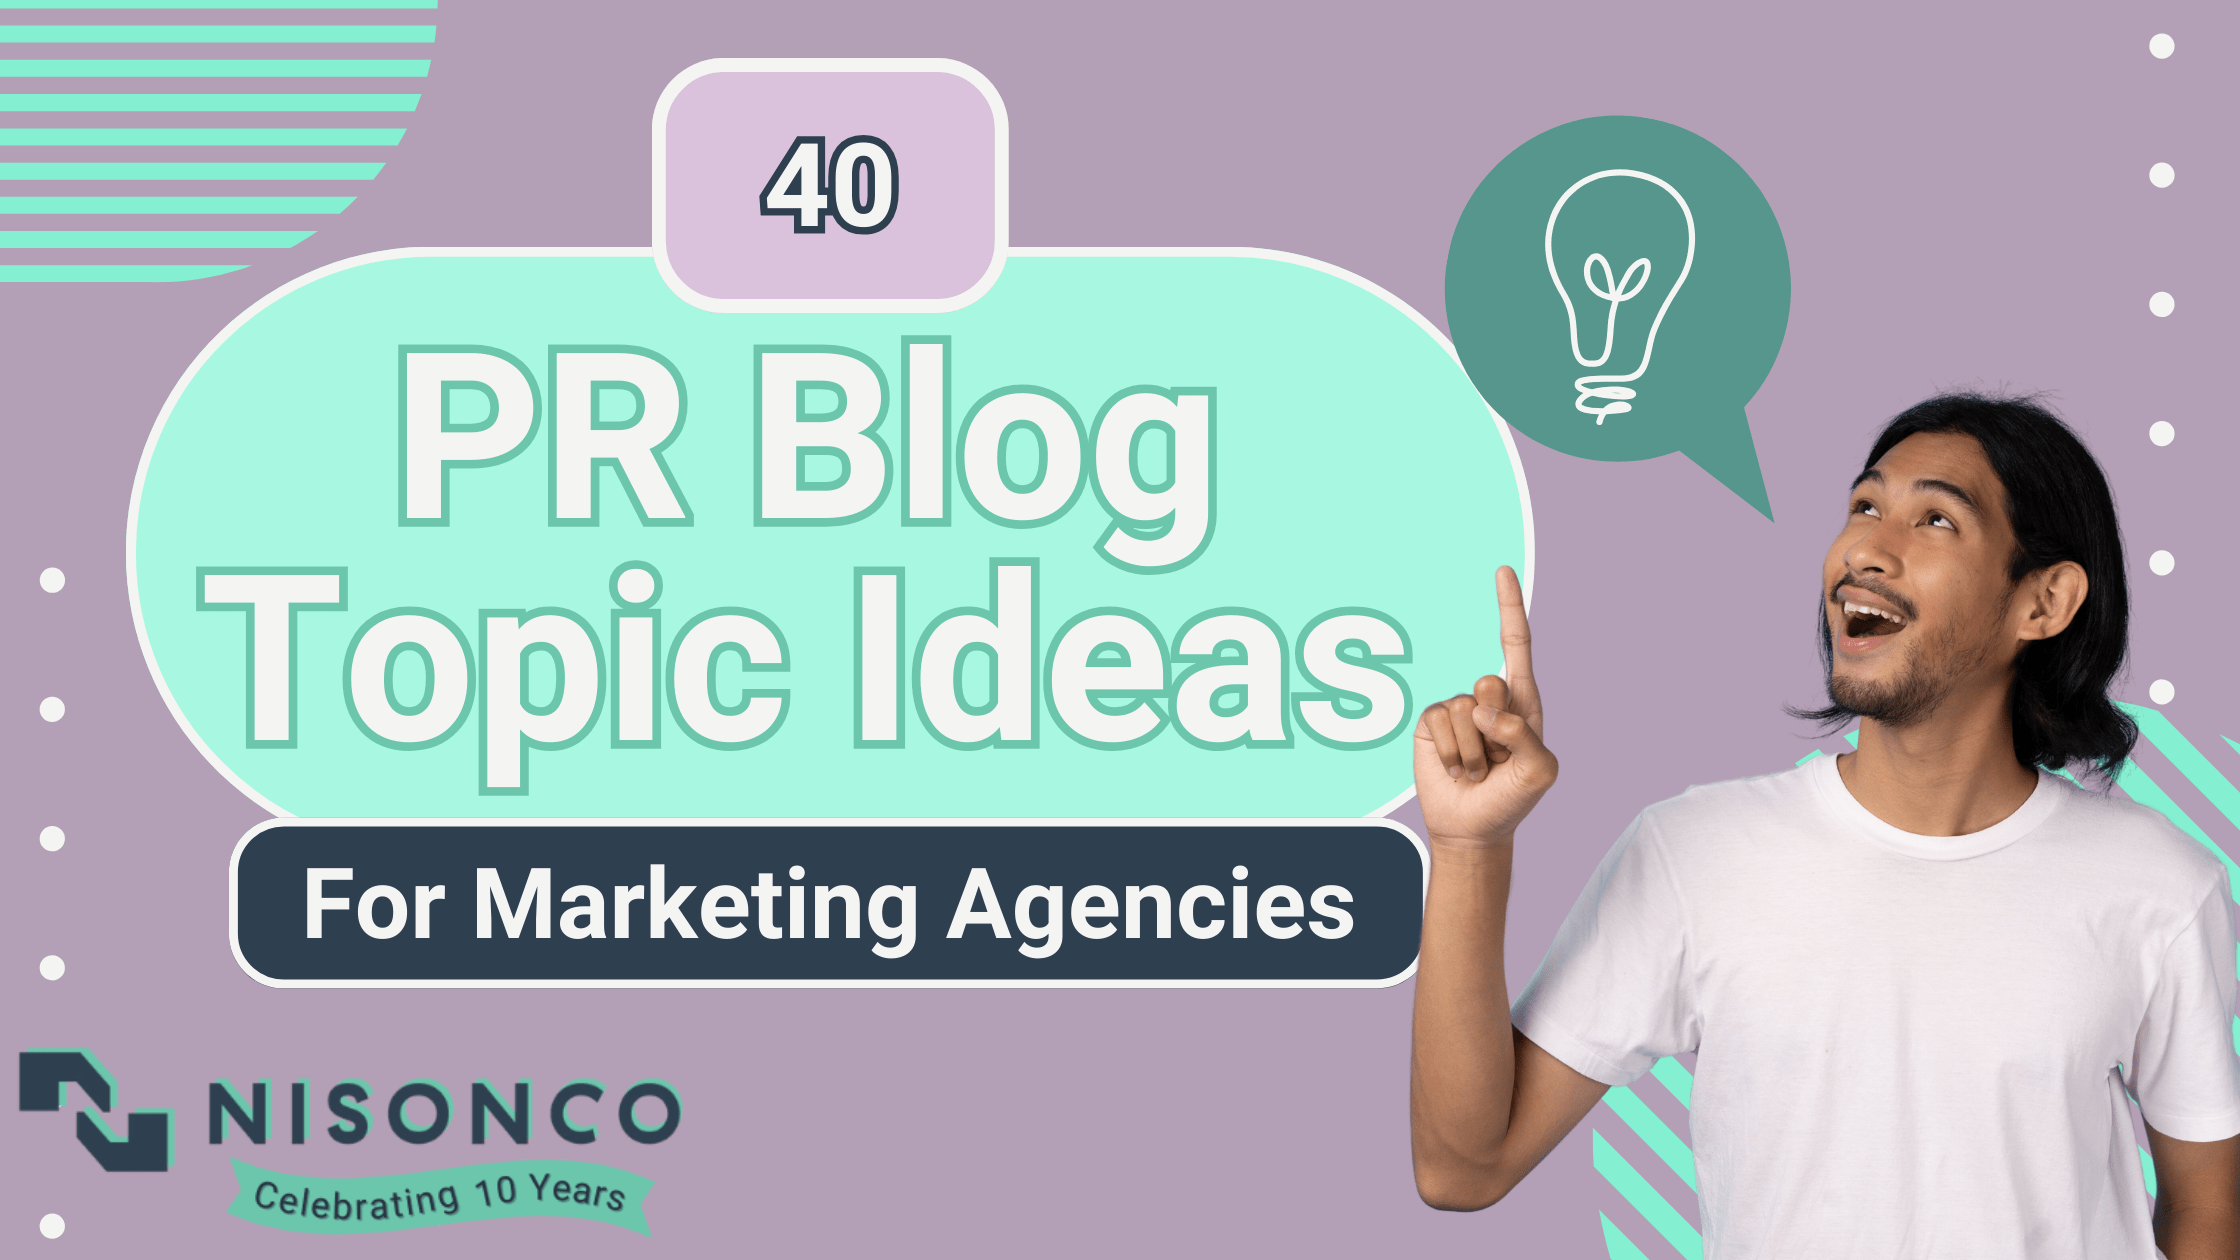 The text '40 PR Blog Topic Ideas for Marketing Agencies' appears to the left of a man in a white t-shirt, holding up his pointer finger. A speech bubble with a lightbulb appears beside him.